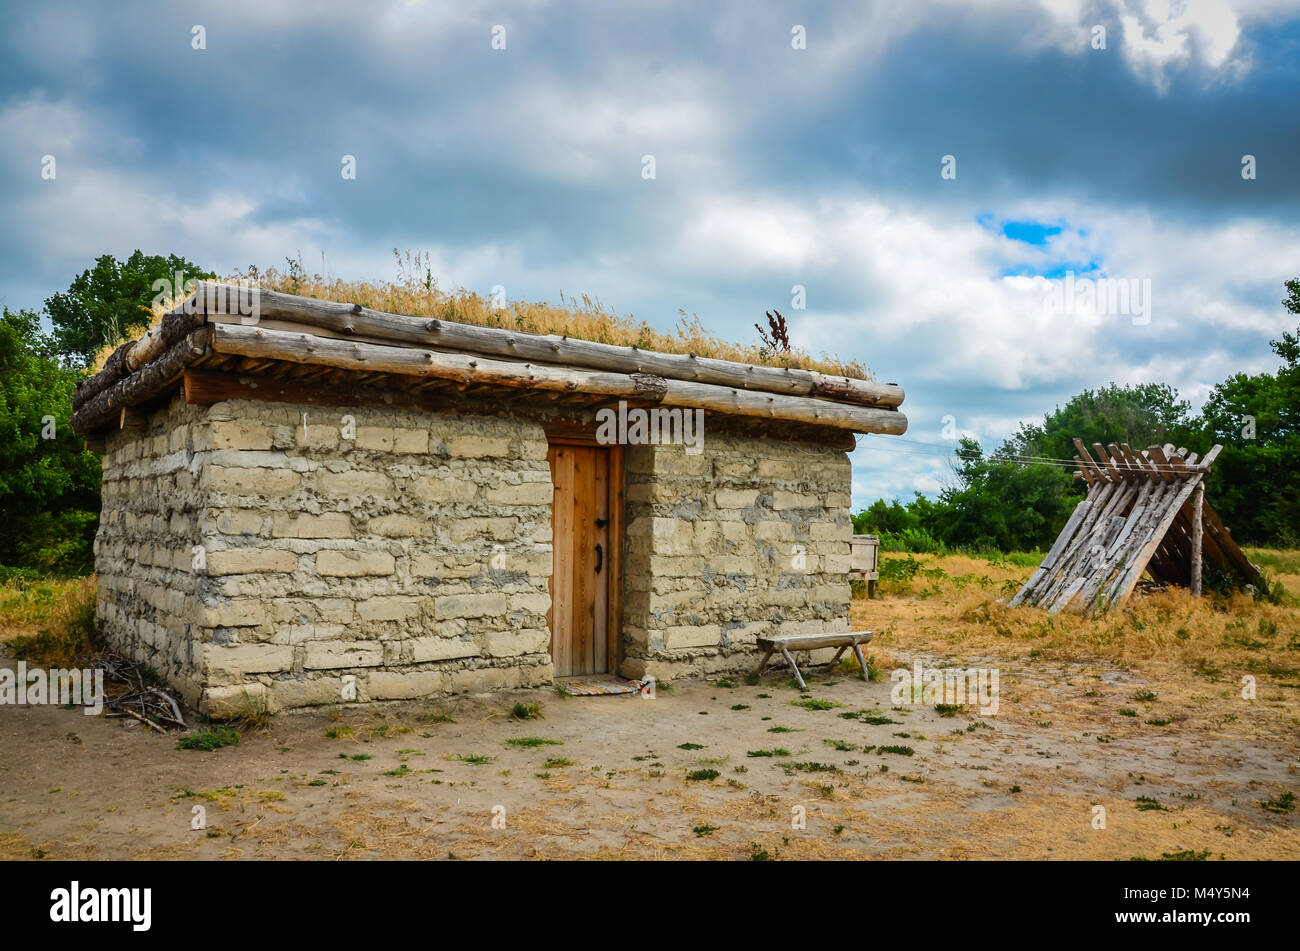 Old sod house with grass roof  on exhibit at Great Platte River Road Archway Monument in Kearney, Nebraska. It's an example of Old West housing of the Stock Photo